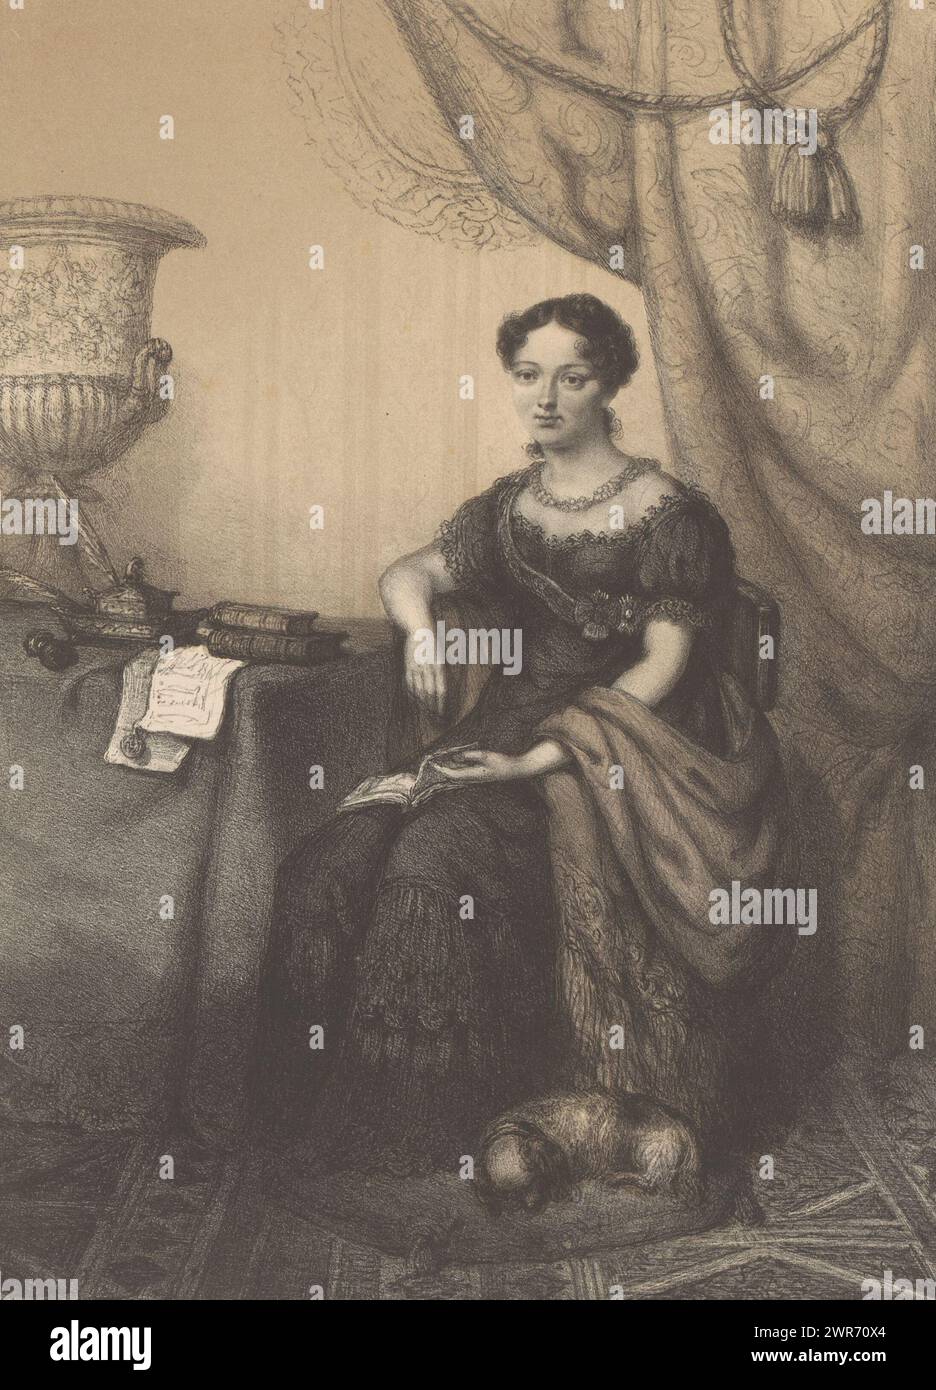 Portrait of Catherine Paulowna of Russia, The sitter sits at a table with a large vase, books, paper and writing utensils on it. A little dog sleeps at her feet. She has a book in her lap., print maker: Johannes Christiaan d'Arnaud Gerkens, after own design by: Johannes Christiaan d'Arnaud Gerkens, printer: Koninklijke Nederlandse Steendrukkerij van C.W. Mieling, The Hague, 1847 - c. 1863, paper, height 292 mm × width 235 mm, print Stock Photo